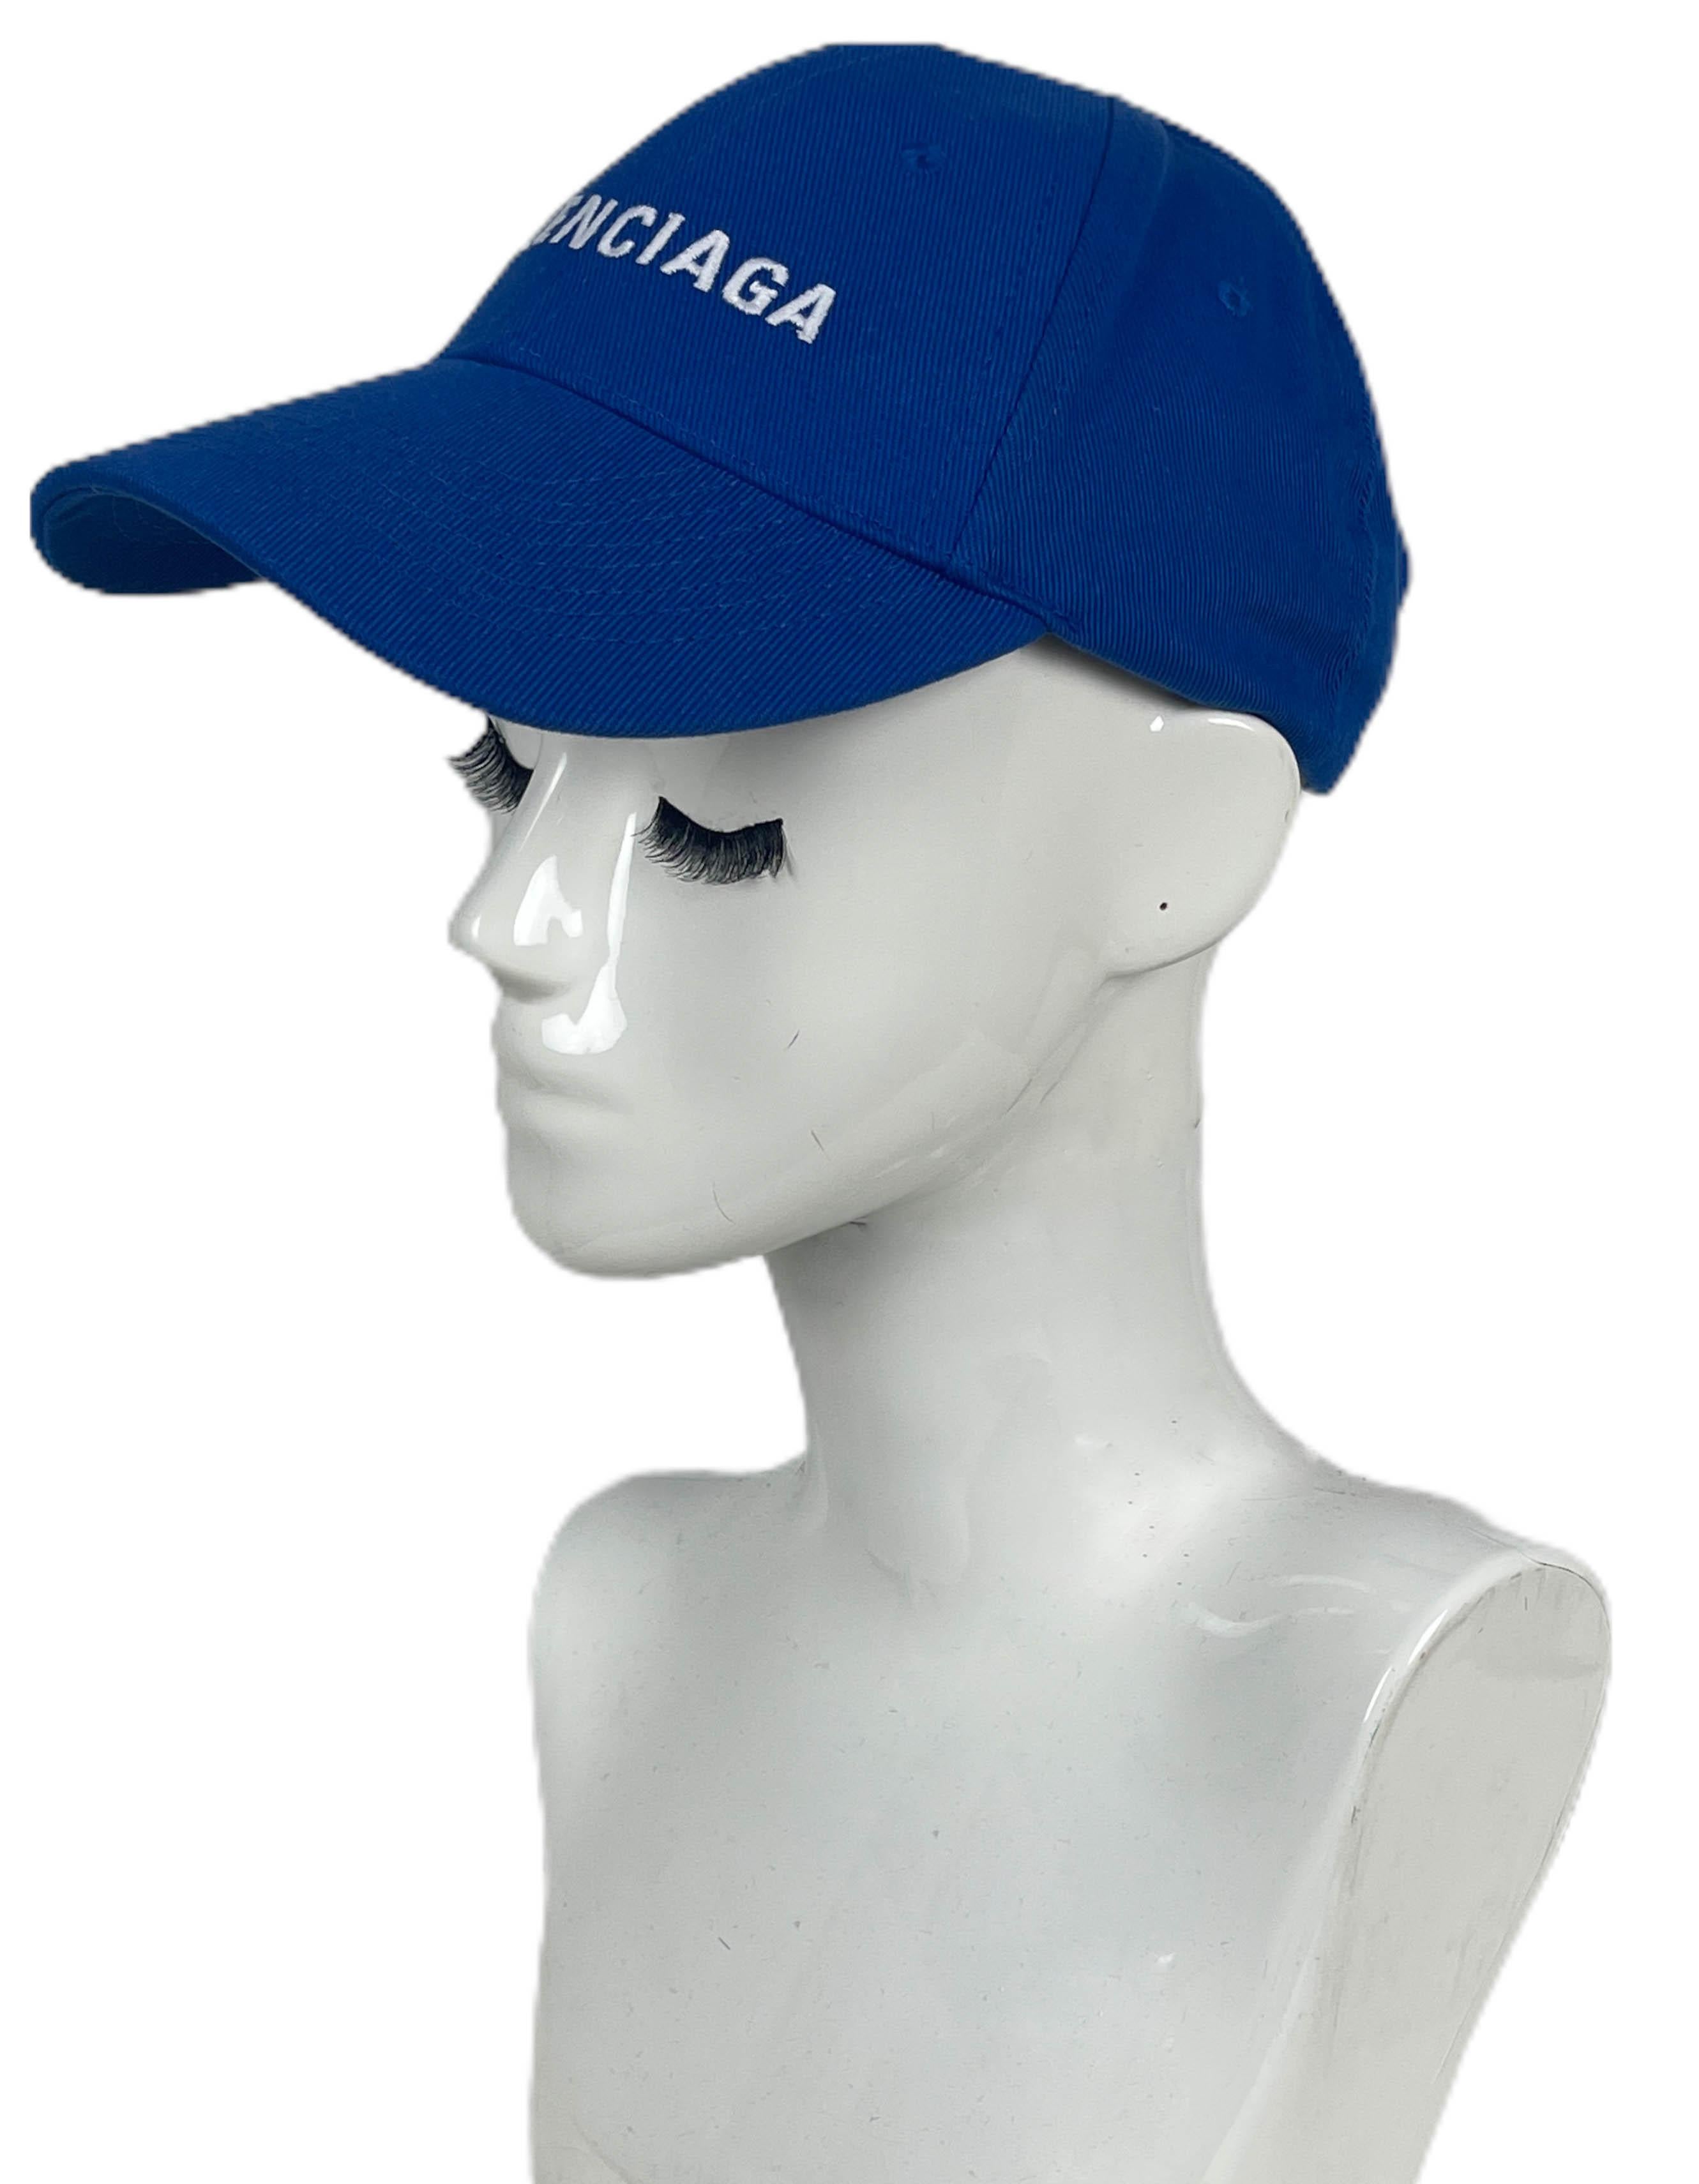 Balenciaga Blue Logo Baseball Cap sz L

Made In: Italy
Color: Blue
Hardware: None
Materials: 100% cotton 
Condition: Excellent with light wear to the front underside
Includes: Dustbag

Measurements: size Large/ 58cm with adjustable back strap